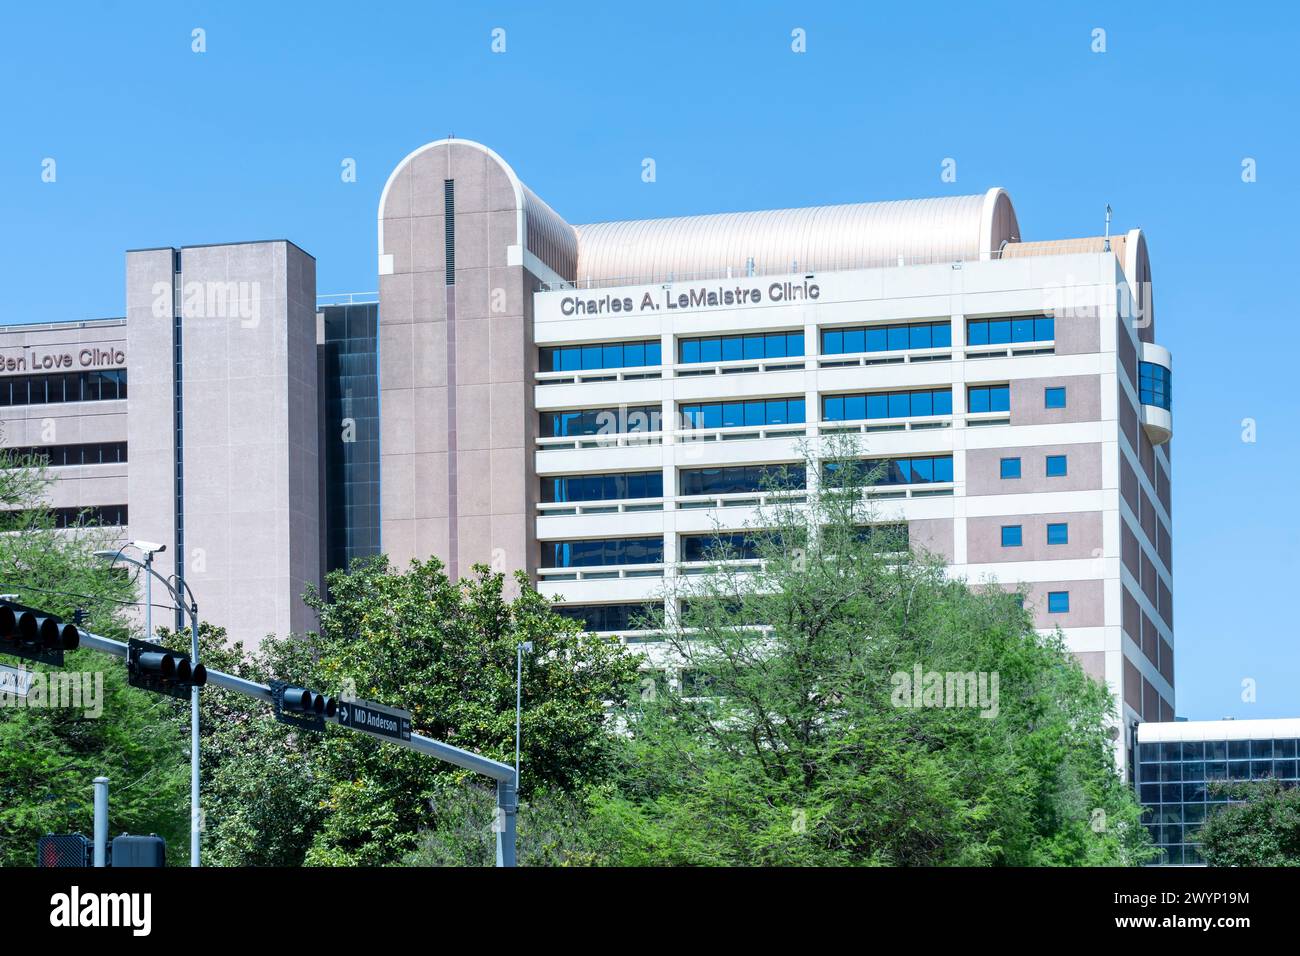 Houston, Texas, USA - April 3, 2024: MD Anderson Charles A. LeMaistre Clinic building at Texas Medical Center in Houston, Texas, USA. Stock Photo